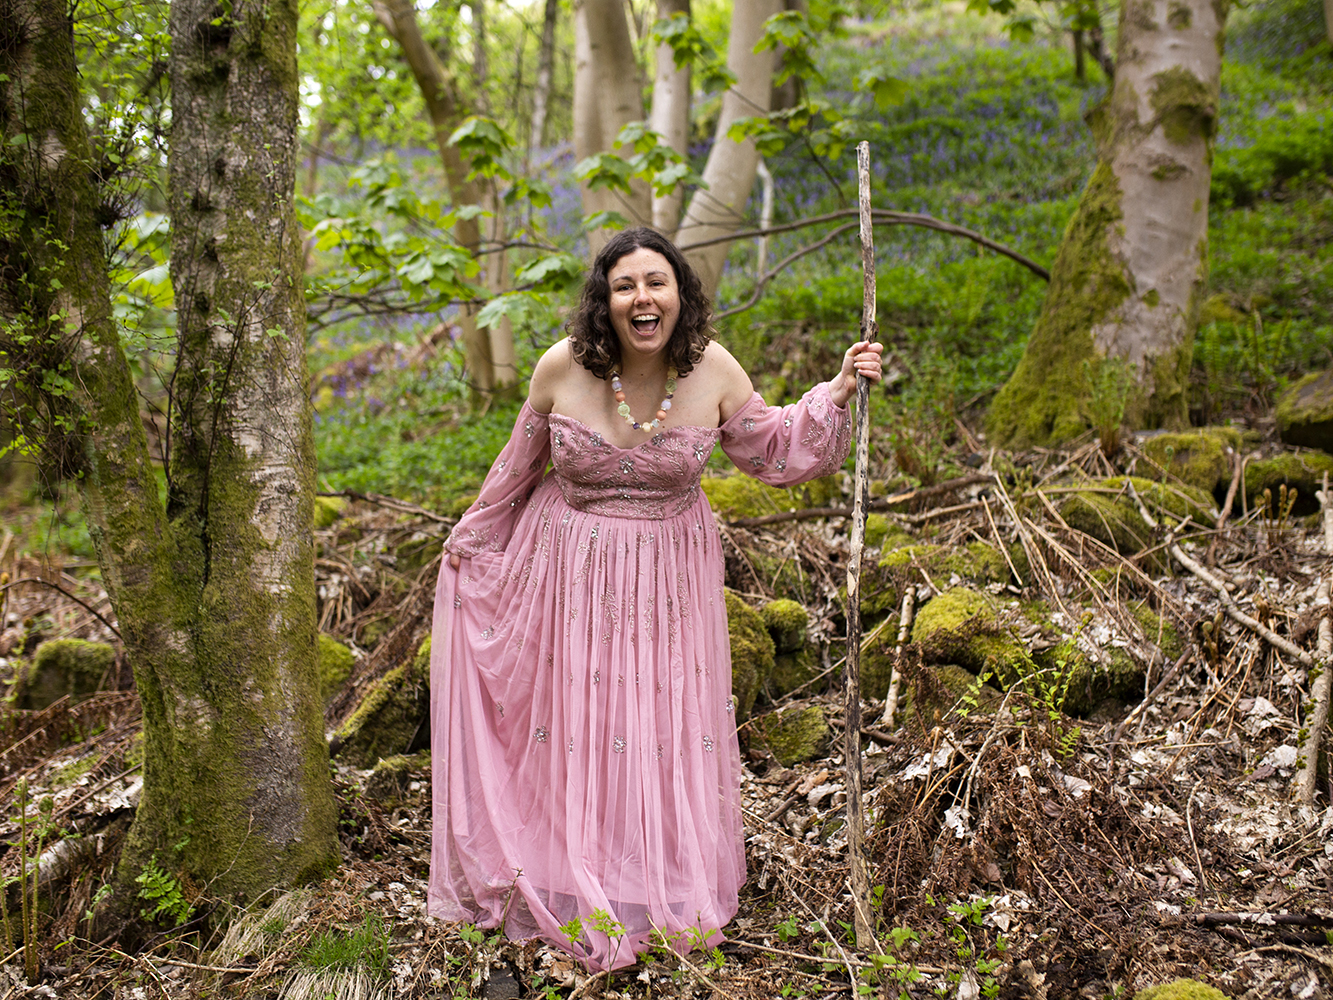 Woman in a pink gown holds a wooden staff and stands in the forest. Her mouth is open and smiling